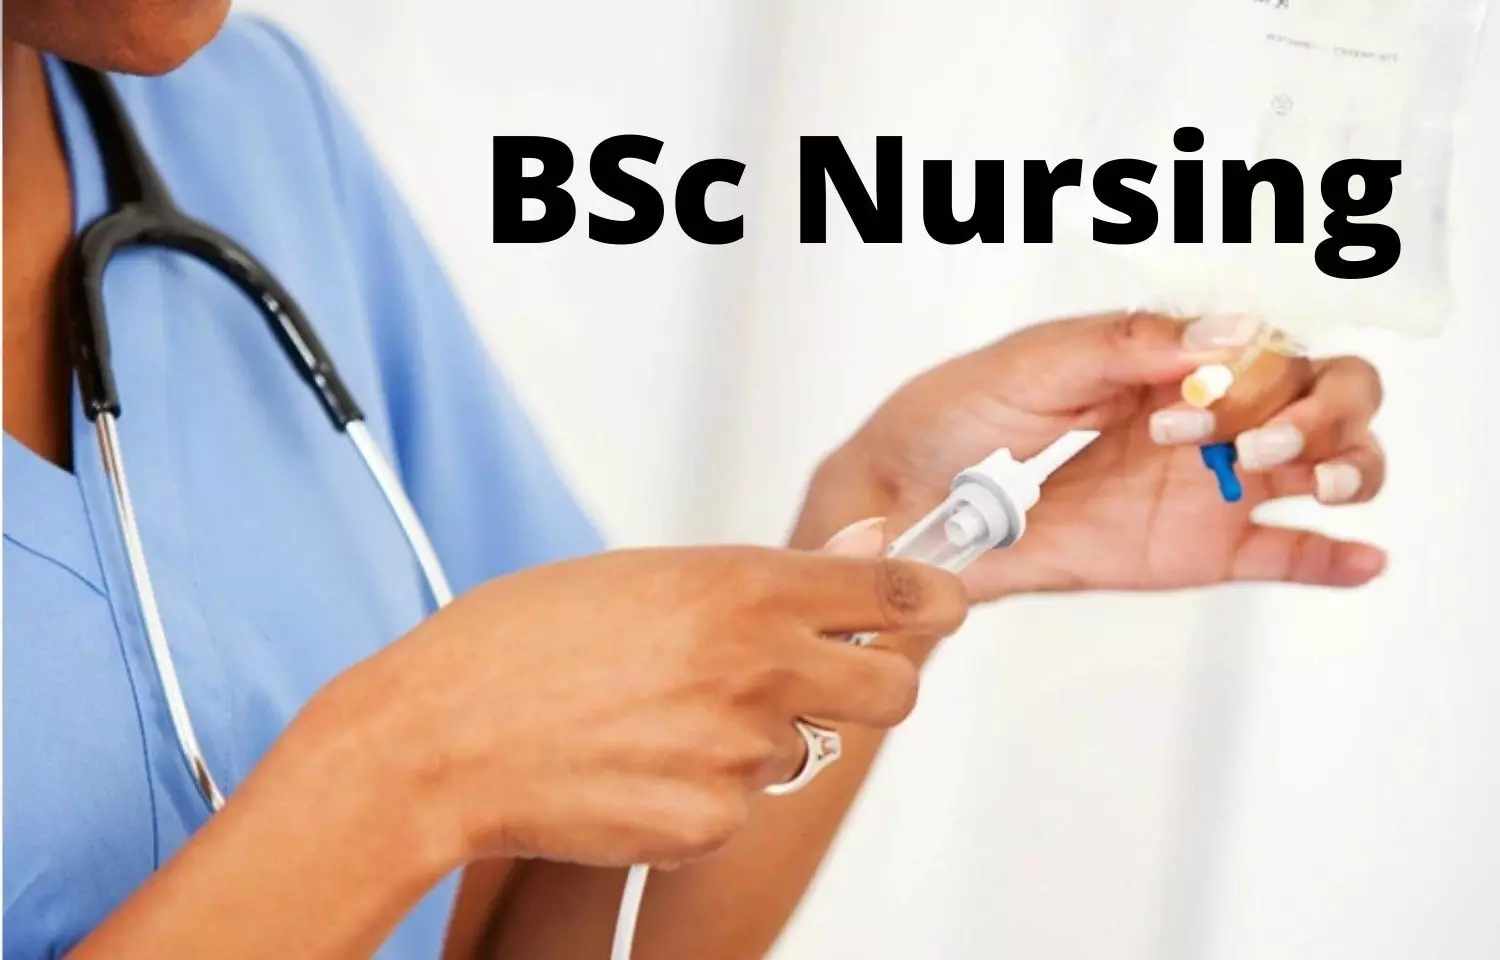 PGIMER announces Round 1 counselling schedule for BSc Nursing admissions 2021